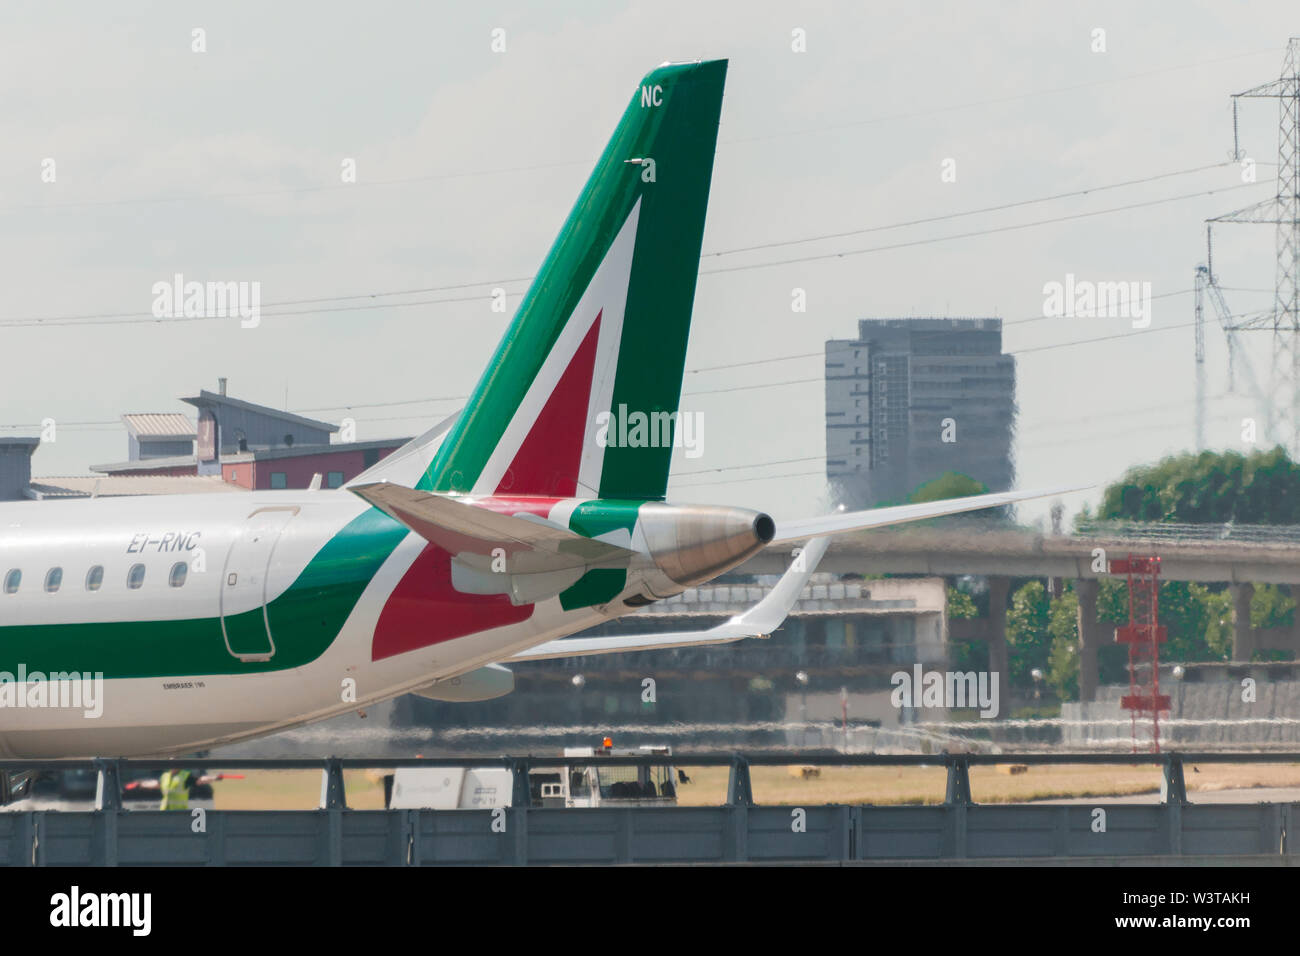 London, Uk - August 2, 2013 - Tail of an Alitalia regional airplane taxiing at London City Airport after landing Stock Photo